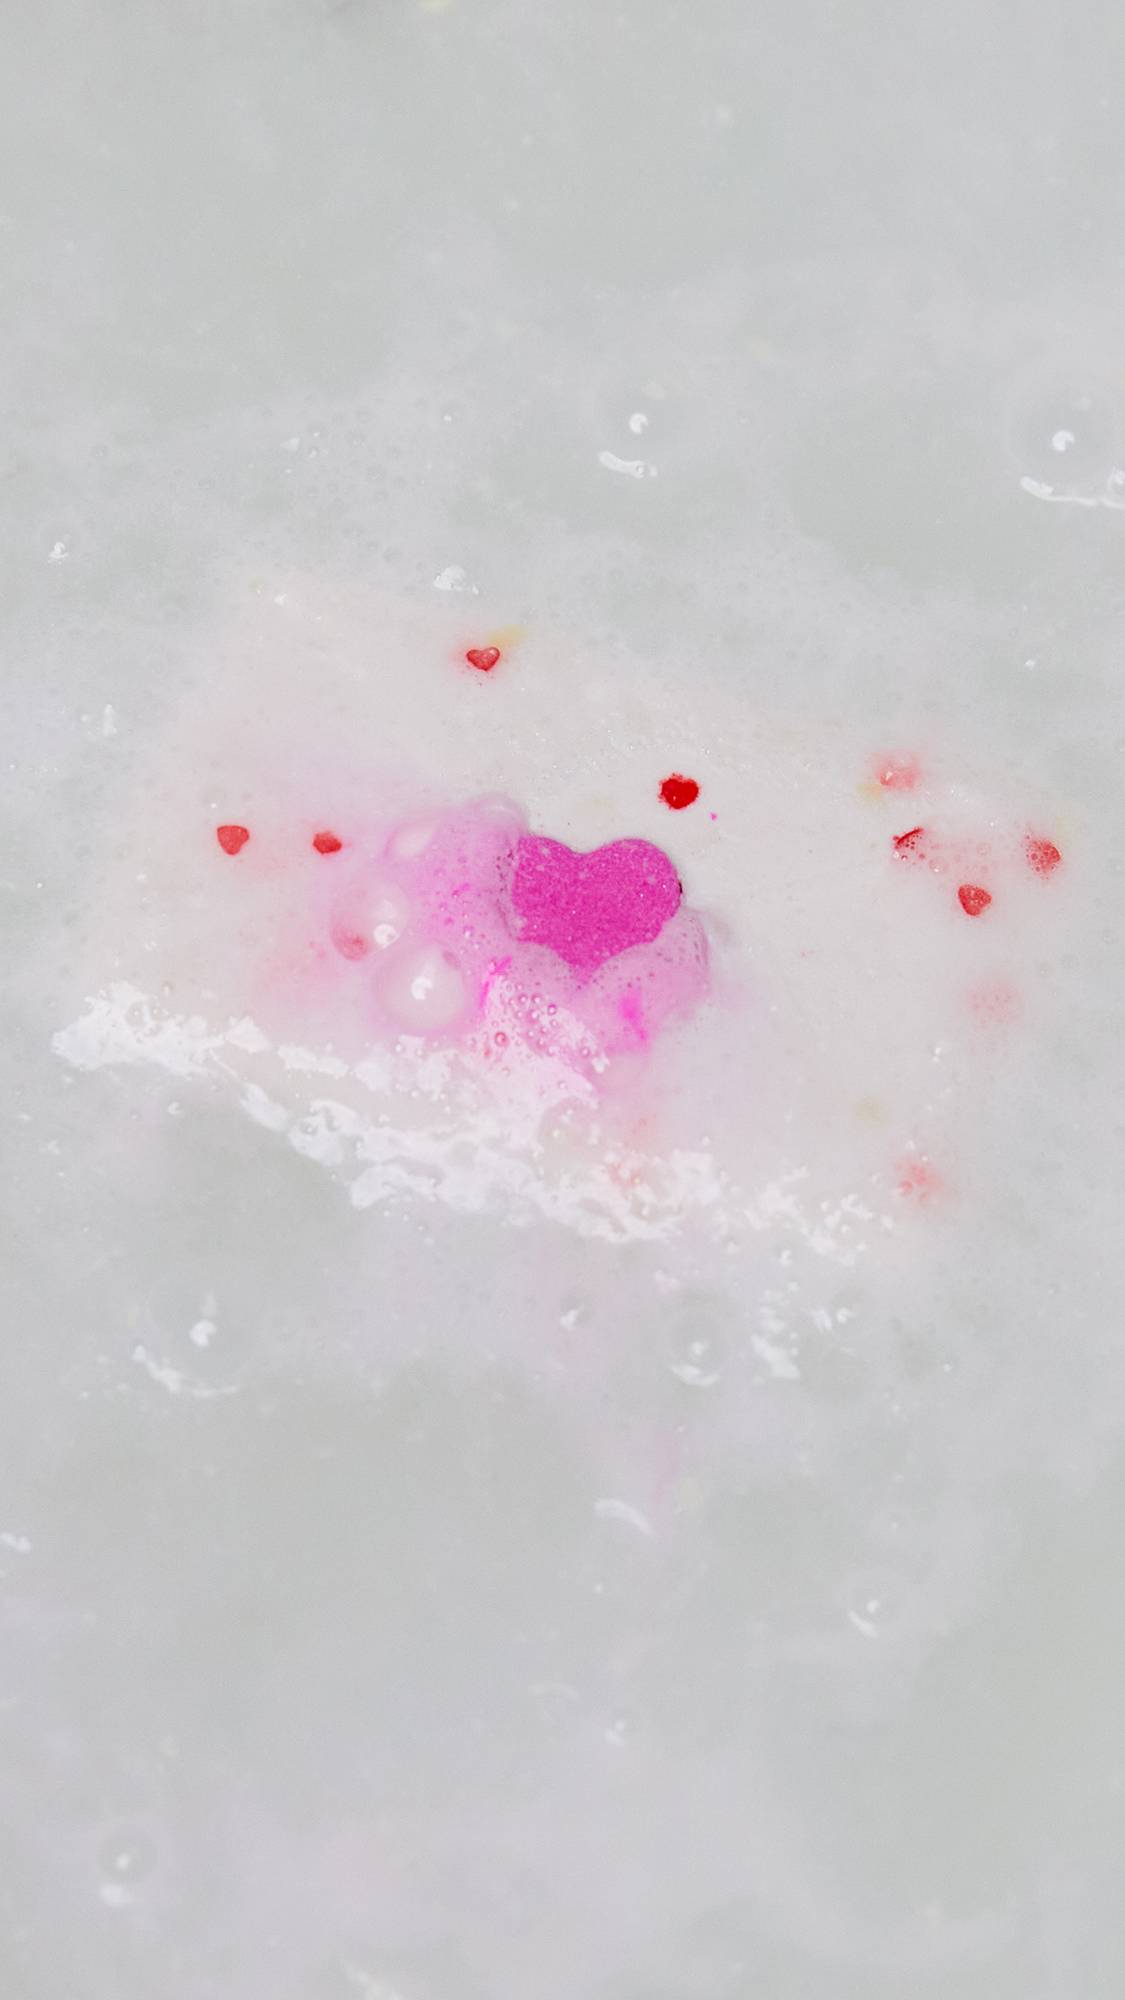 The Love Letter bath bomb has almost fully dissolved leaving behind dots of tiny, red, heart confetti and a single large pink heart.